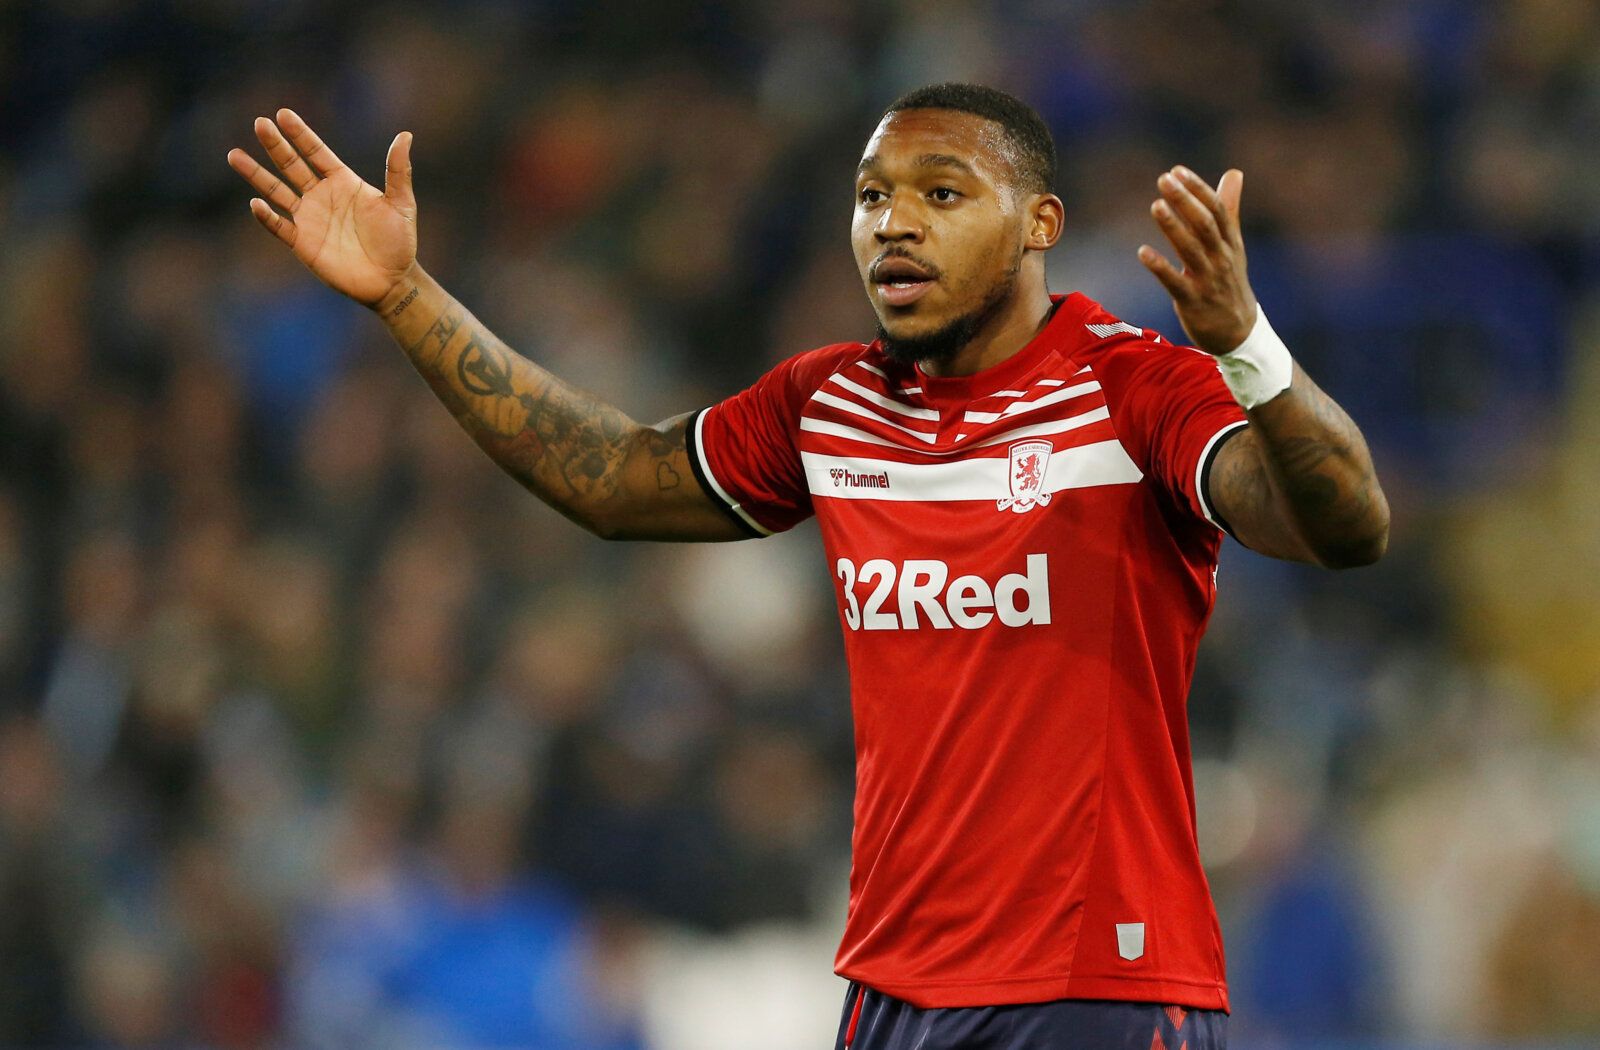 Soccer Football - Championship - Huddersfield Town v Middlesbrough - John Smith's Stadium, Huddersfield, Britain - October 23, 2019   Middlesbrough's Britt Assombalonga reacts   Action Images/Craig Brough    EDITORIAL USE ONLY. No use with unauthorized audio, video, data, fixture lists, club/league logos or 